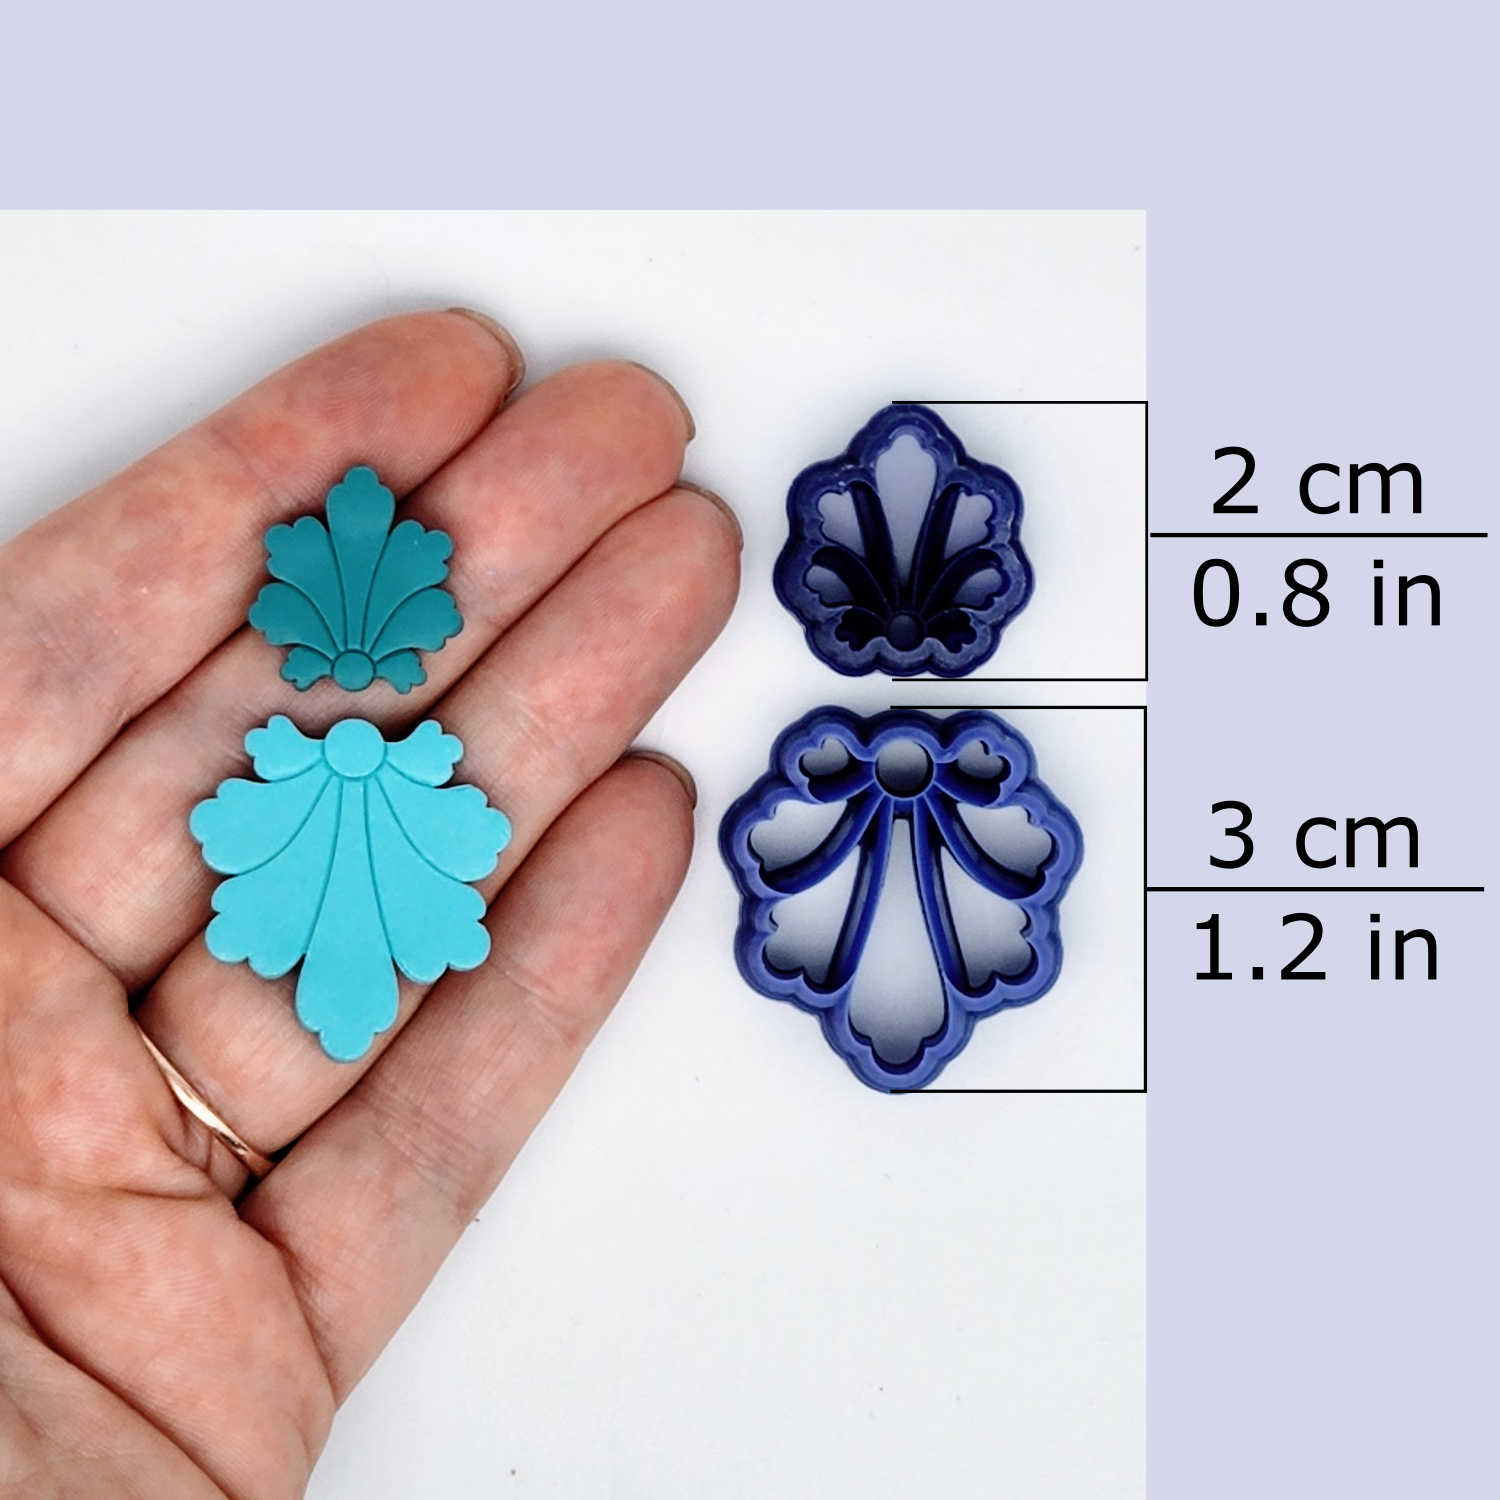 Filigree flower debossing clay cutter available size, 2 centimeters / 0.8 inches, 3 centimeters / 1.2 inches